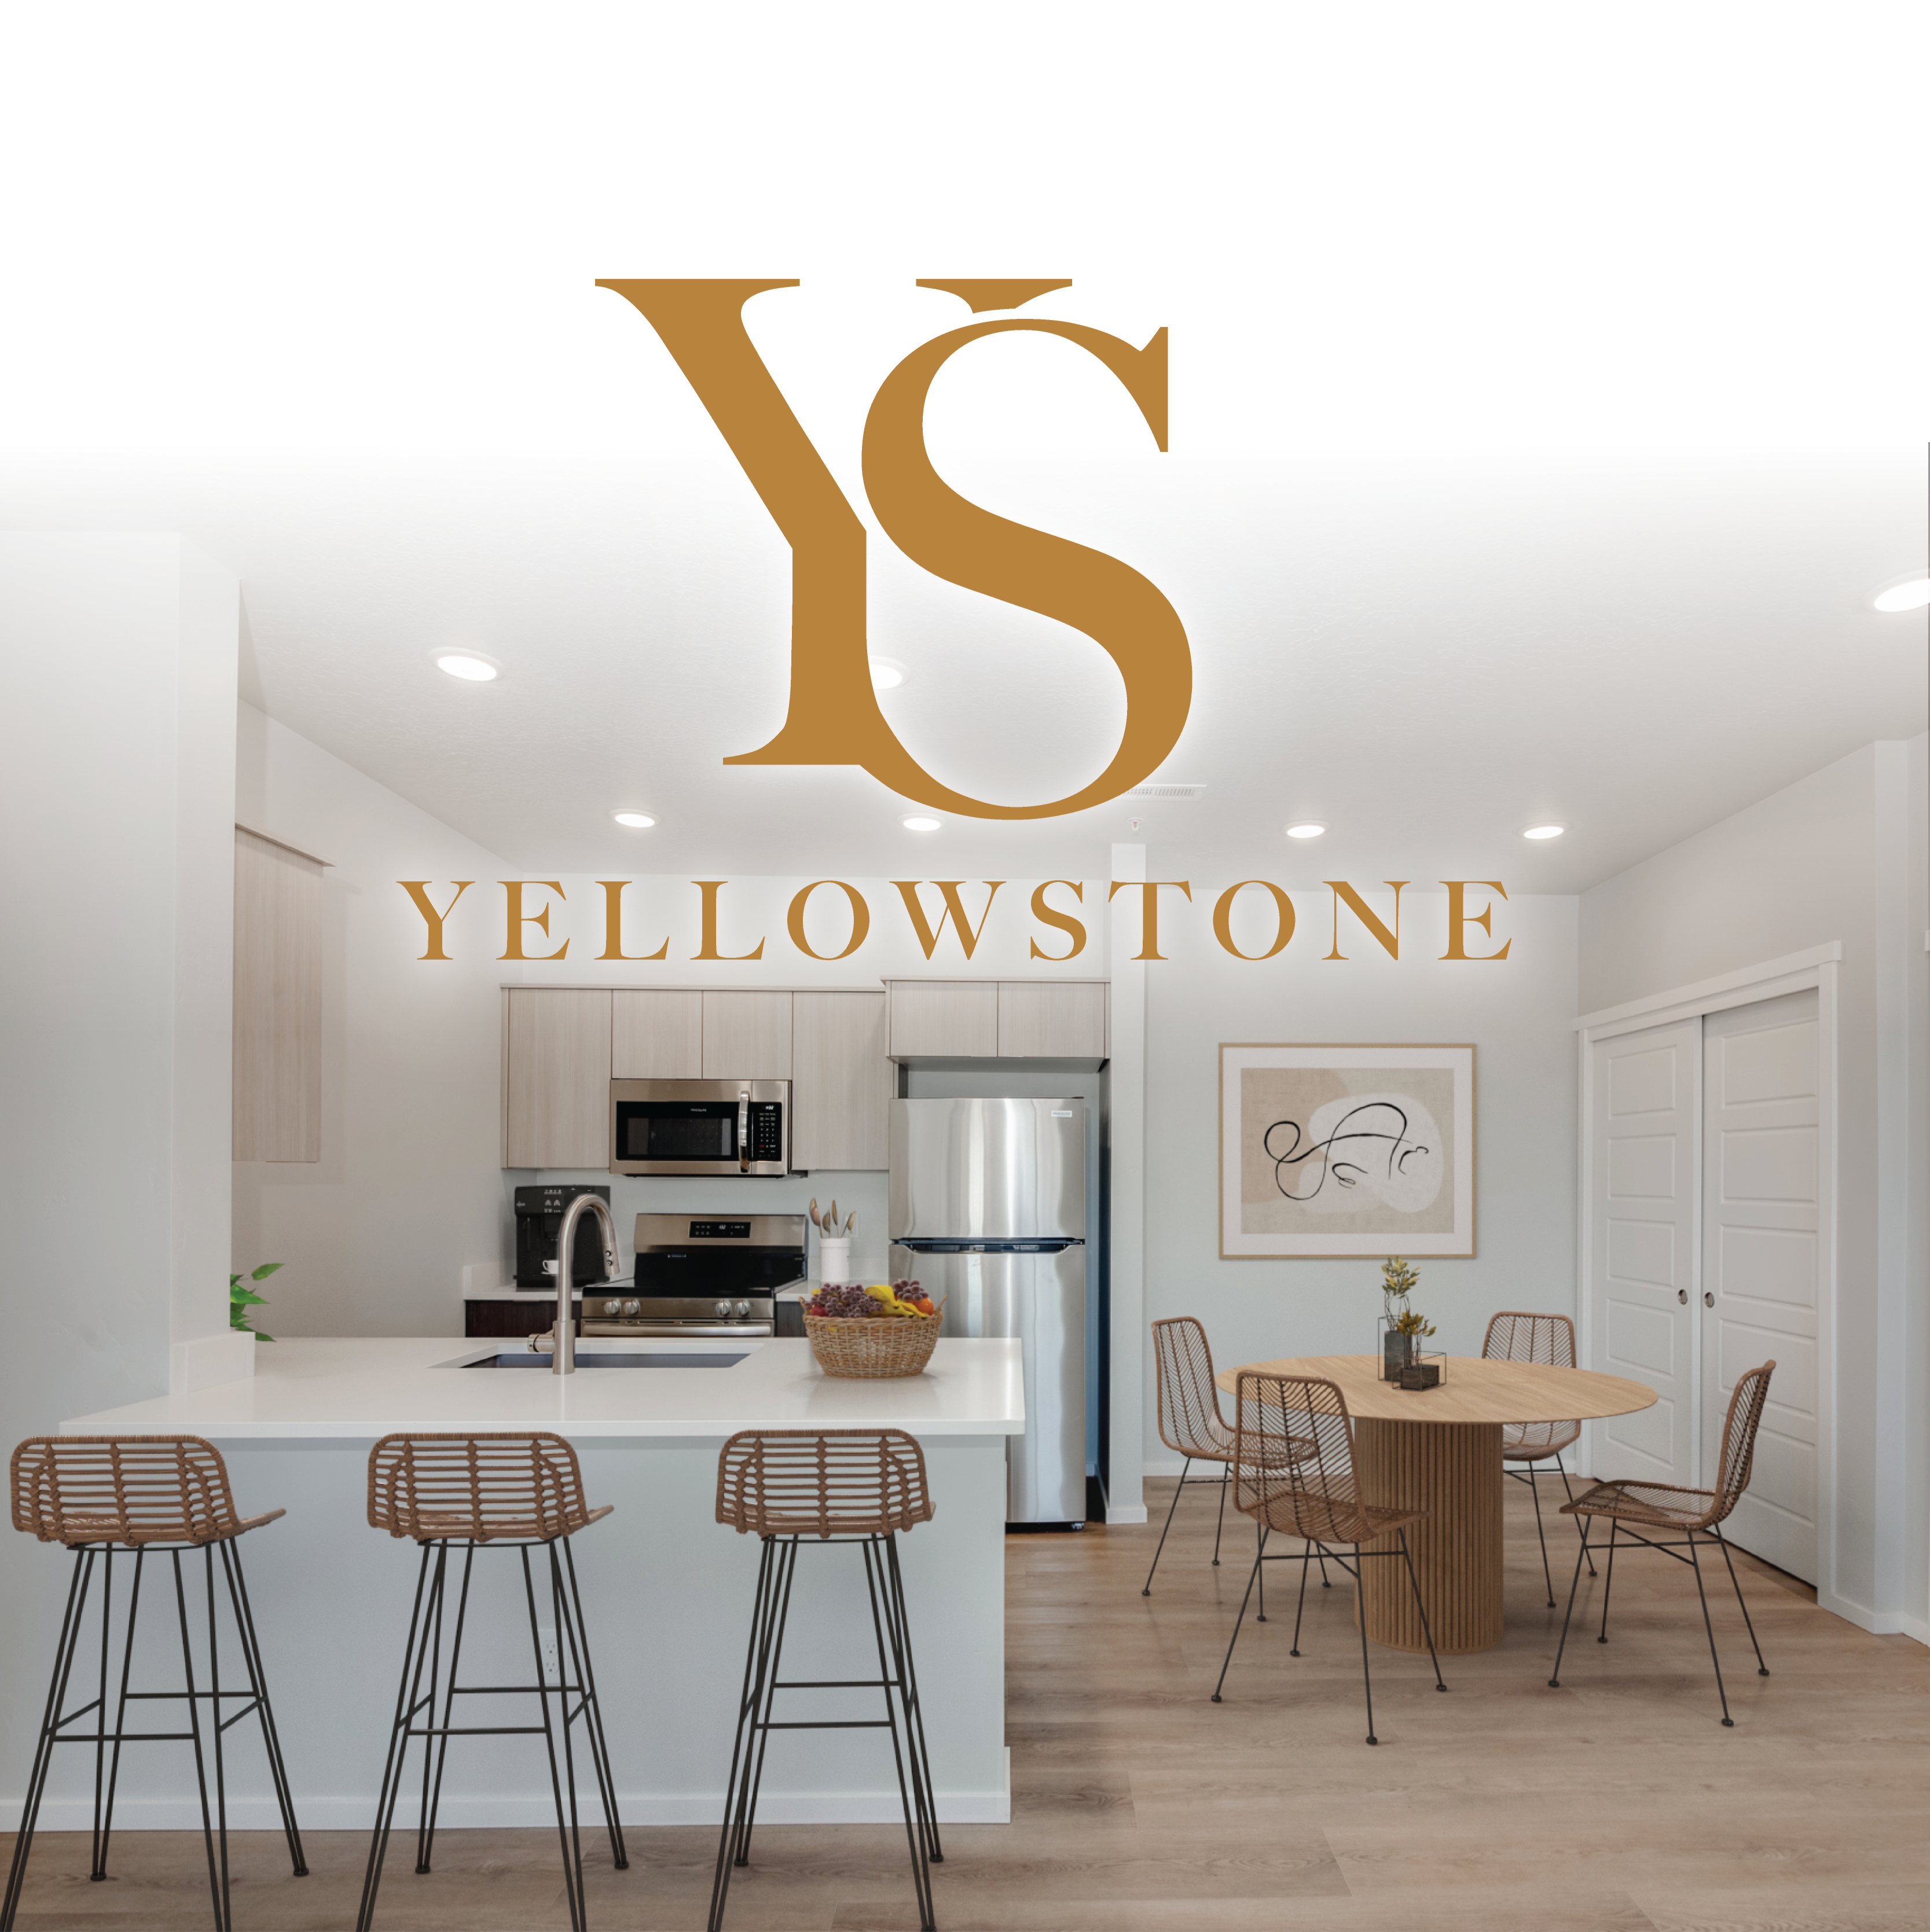 CBH Rentals just released Yellowstone, a new luxury Rental Community in Meridian, Idaho featuring resort-style amenities and luxurious living spaces.